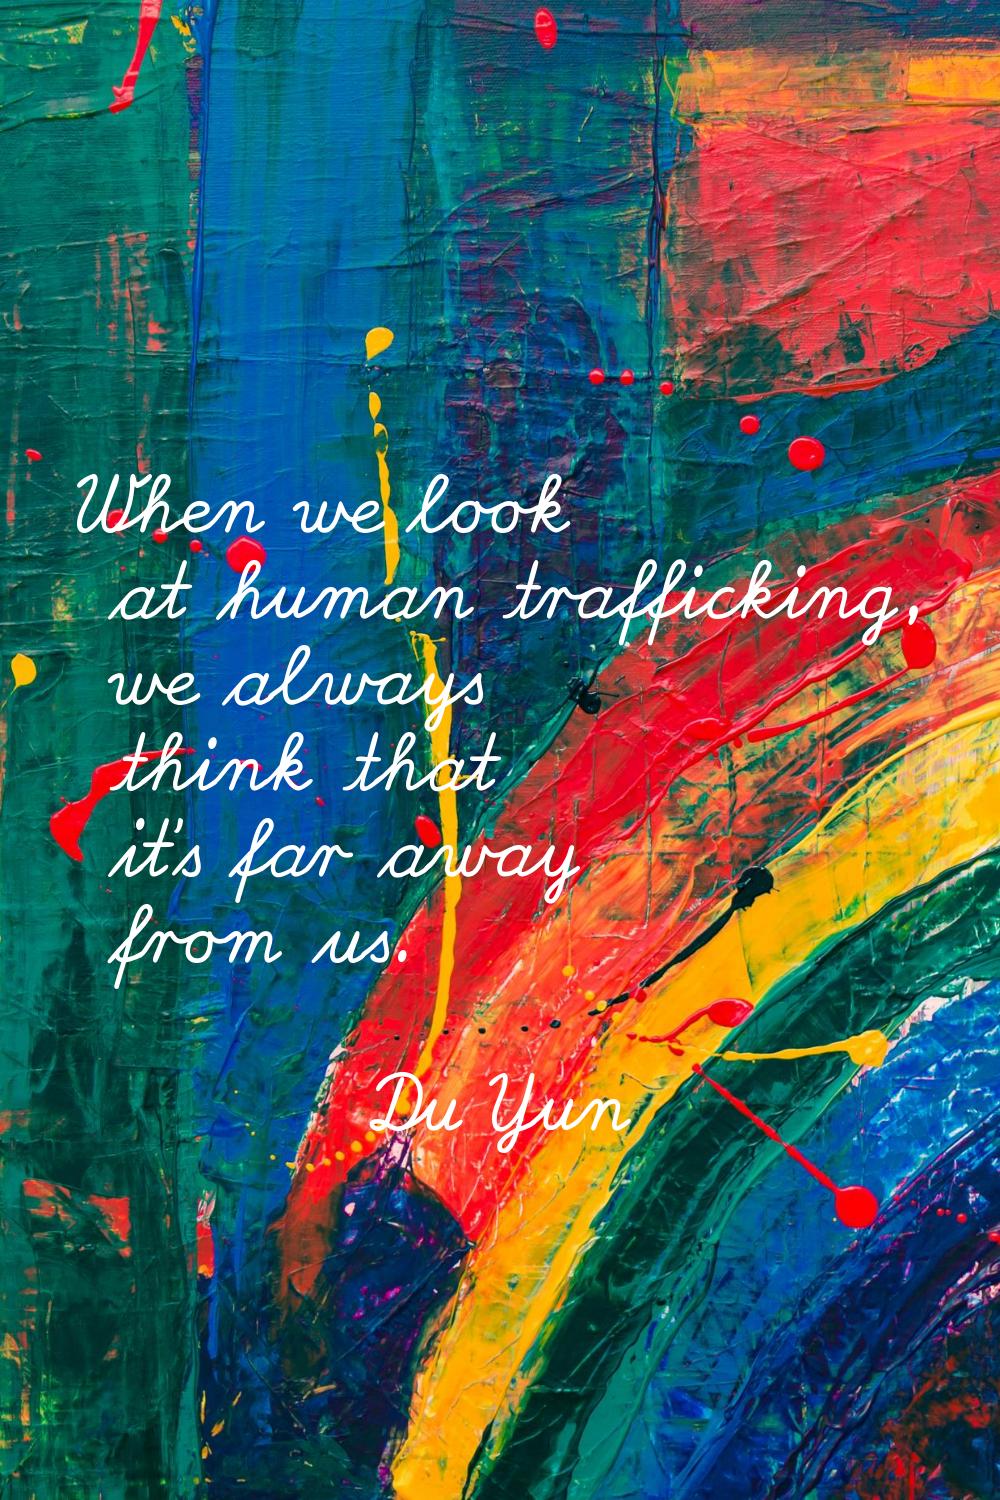 When we look at human trafficking, we always think that it's far away from us.